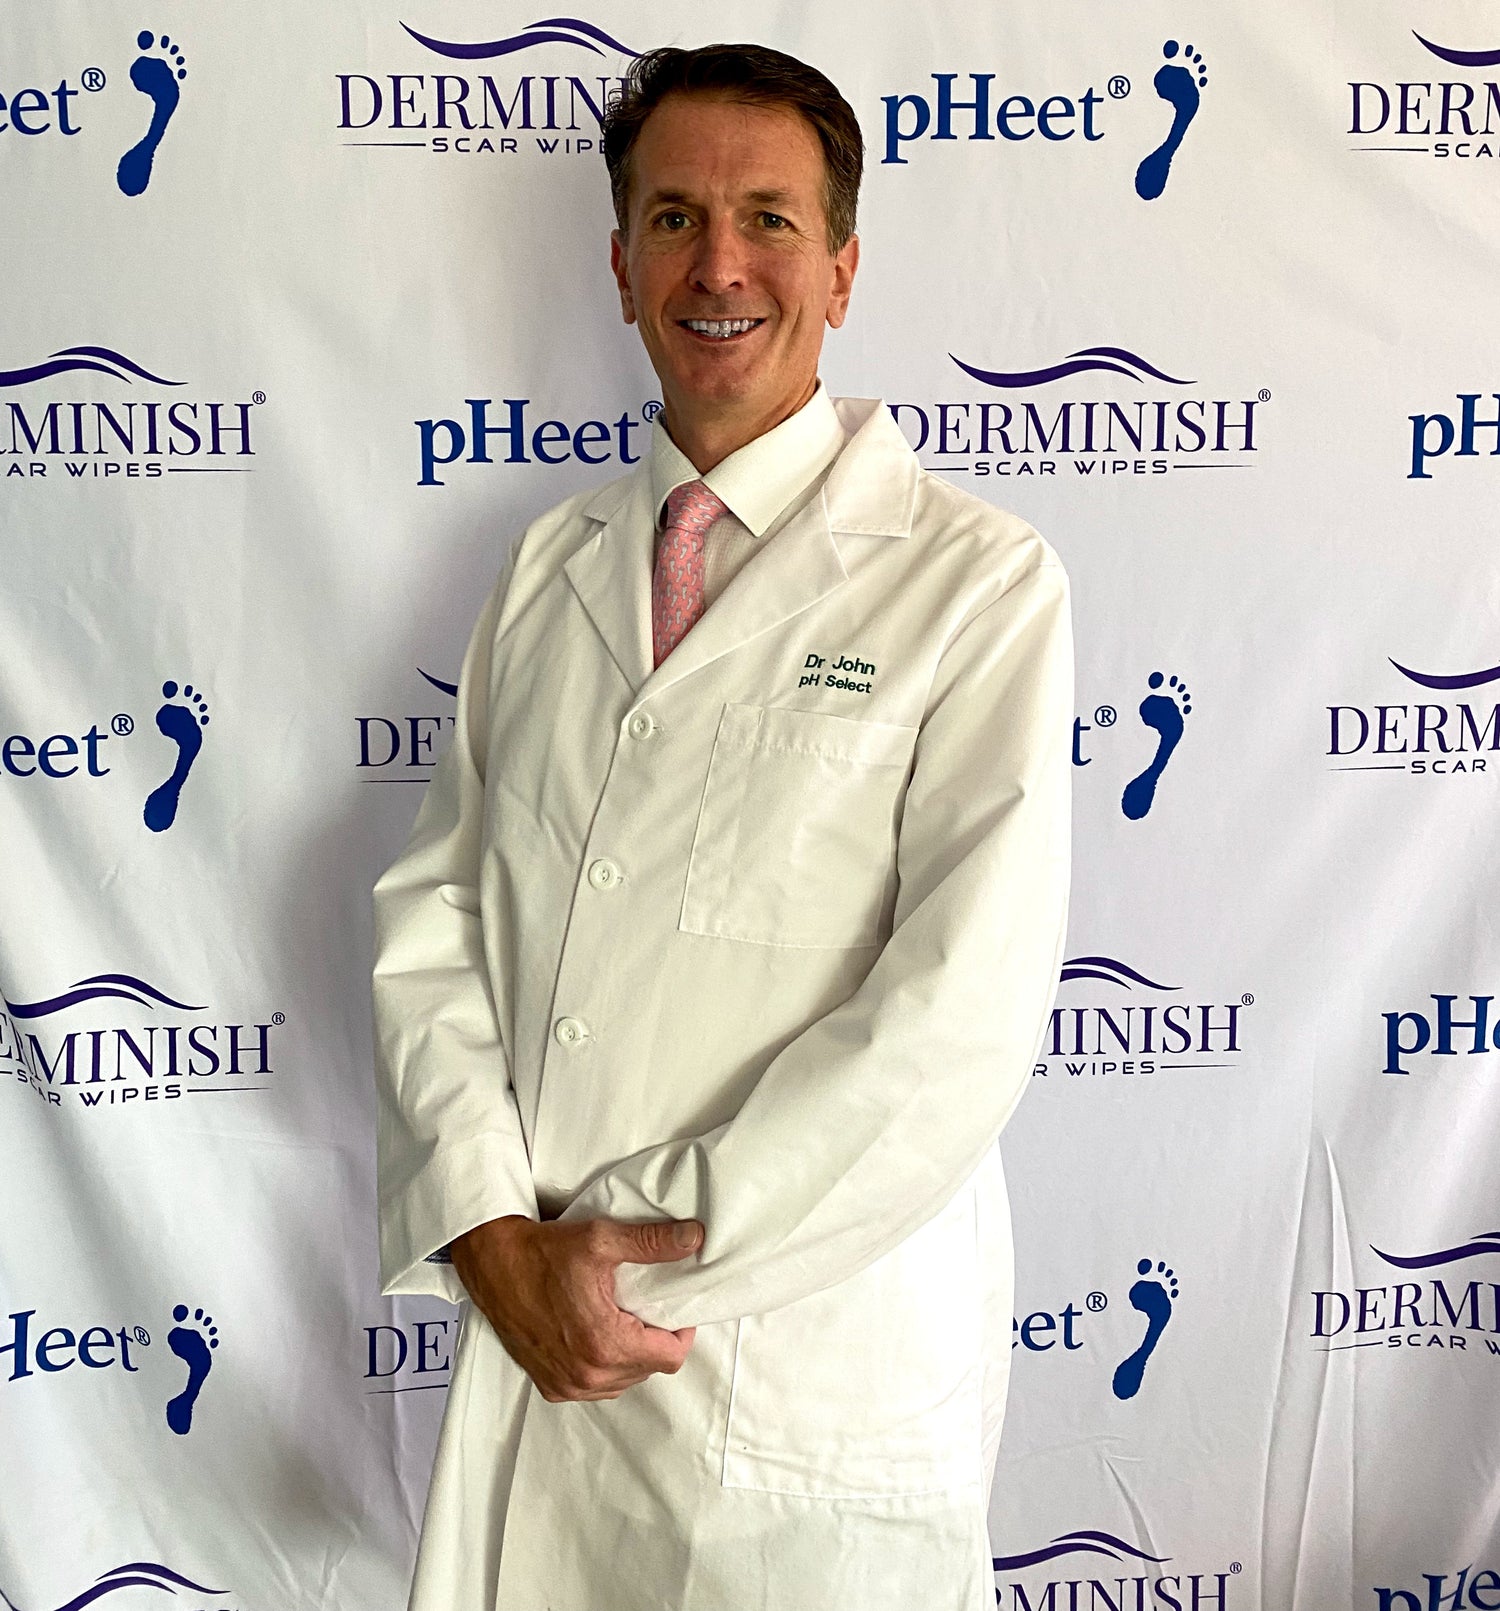 Dr. John was the podiatrist whom founded pH Select. He was helping patients with their eczema and fungus issues. He developed products that are all-natural and effective for skincare. 